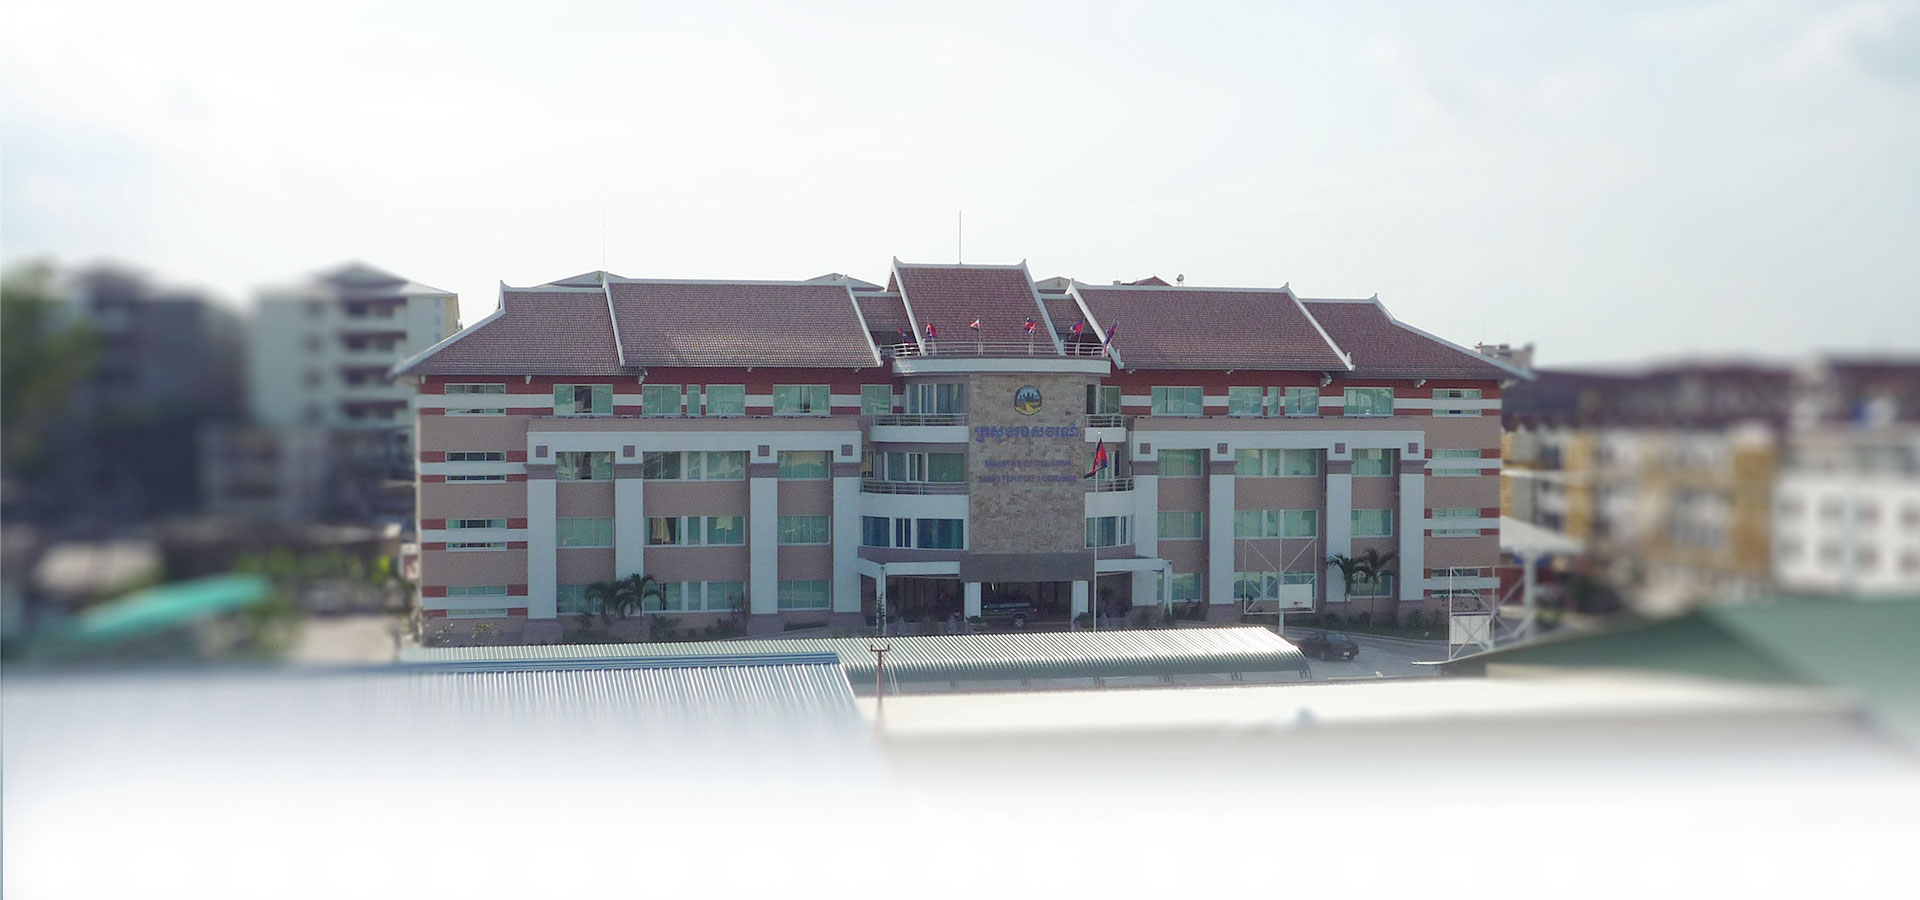 The Ministry of Cambodia